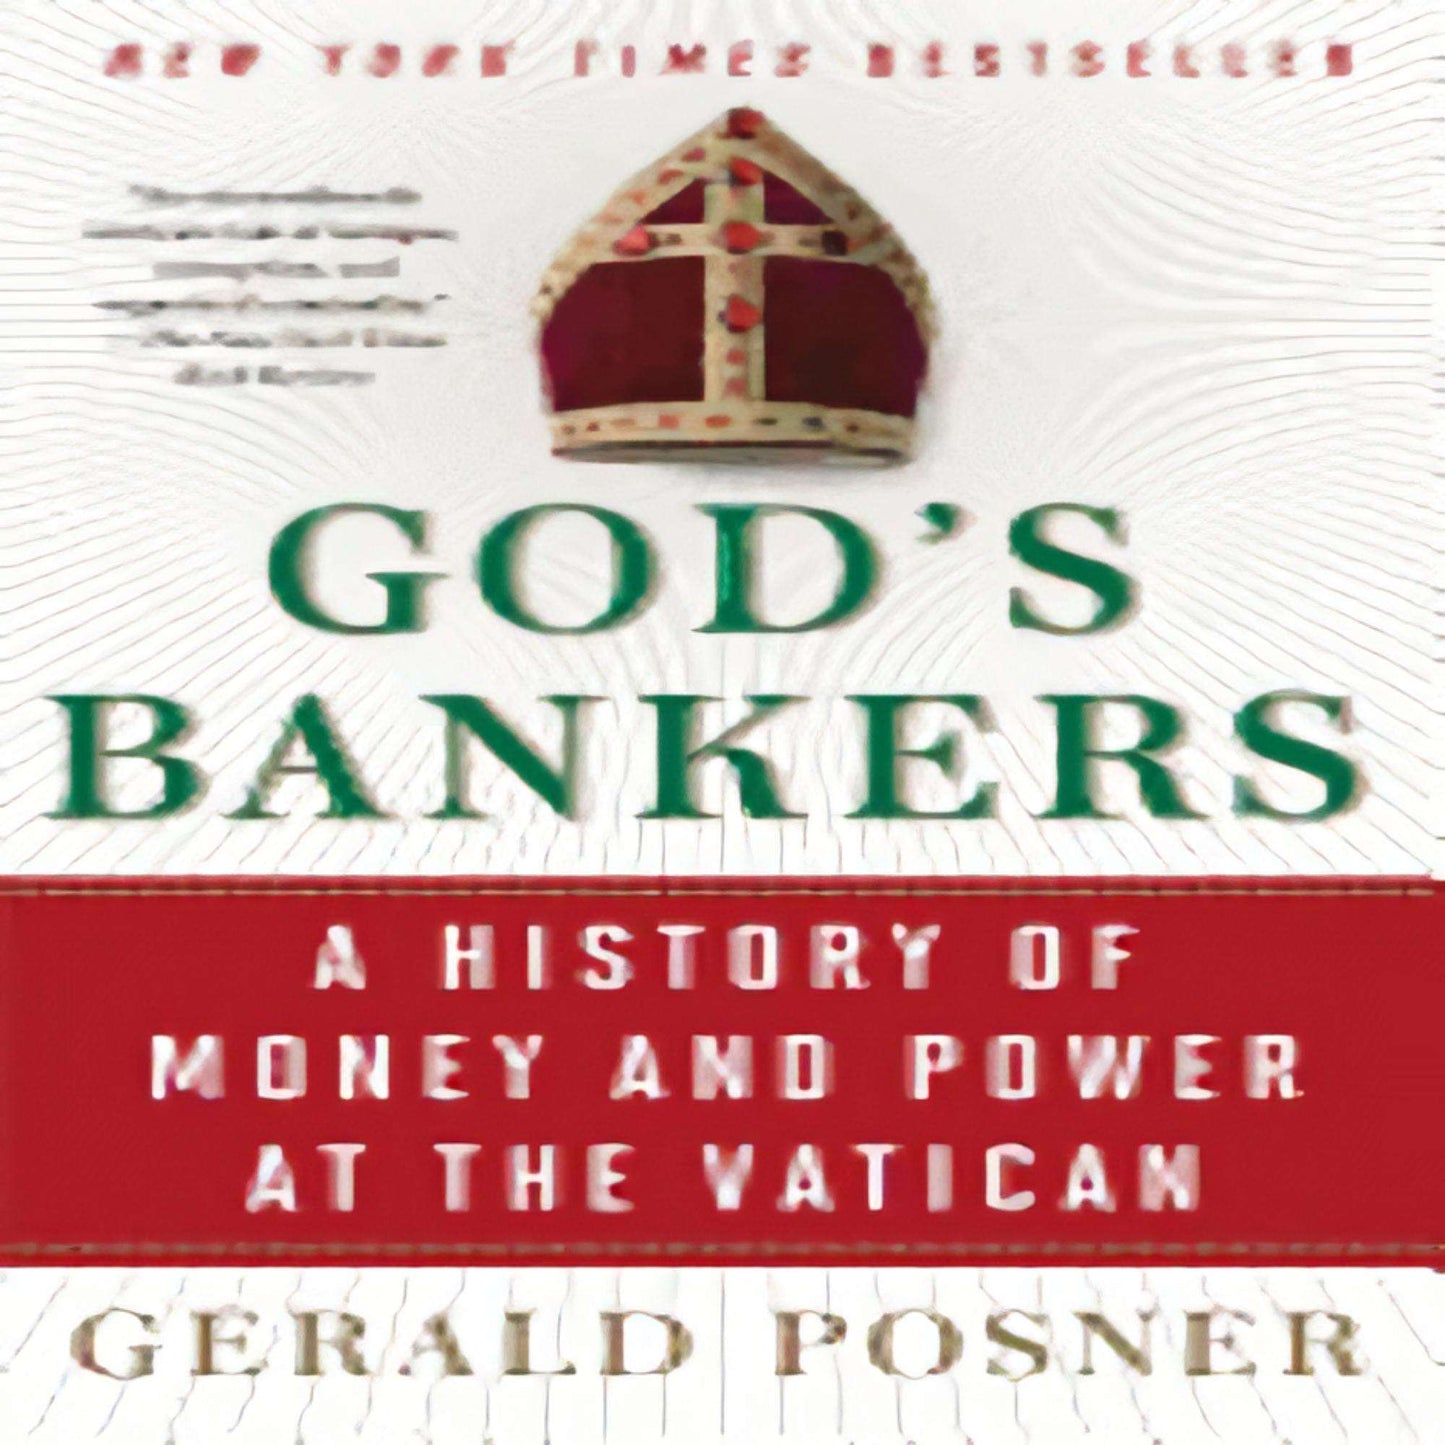 God's Bankers: A History of Money and Power at the Vatican56-012523-1416576592DPGBOOKSTORE.COM. Today's Bestsellers.